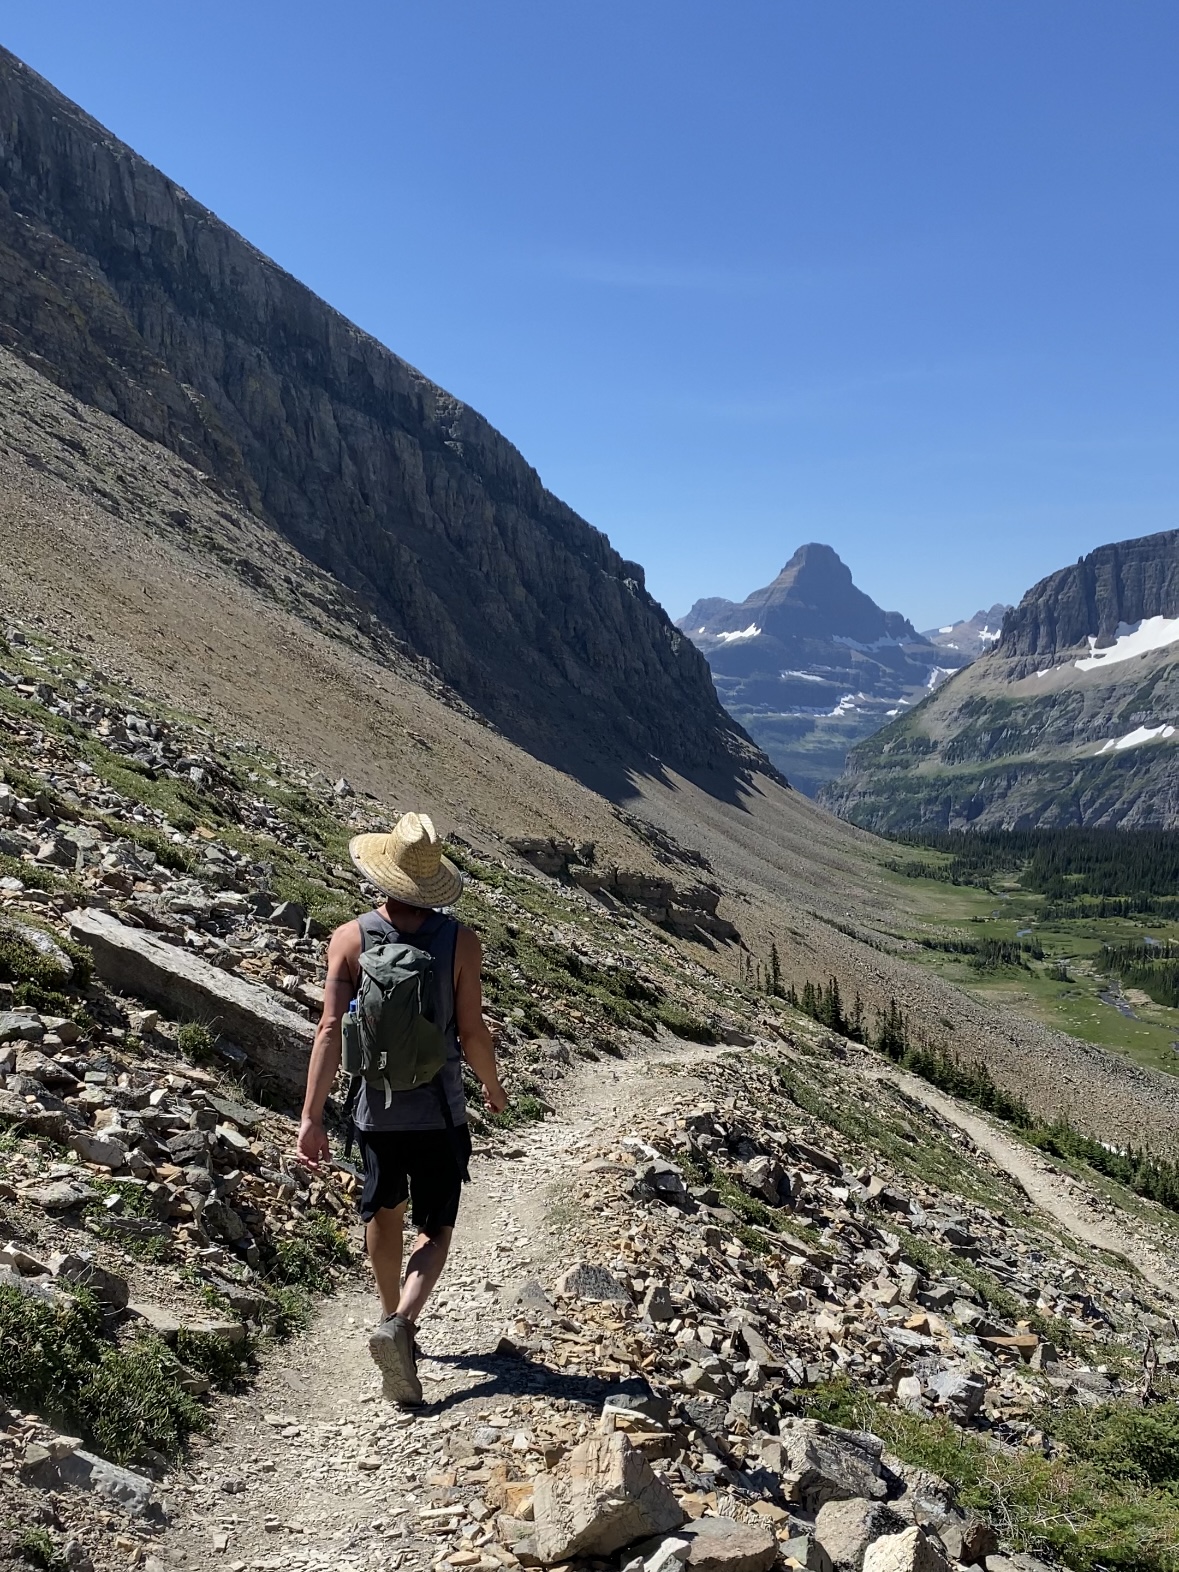 Hiking down from Siyeh pass in Glacier National Park